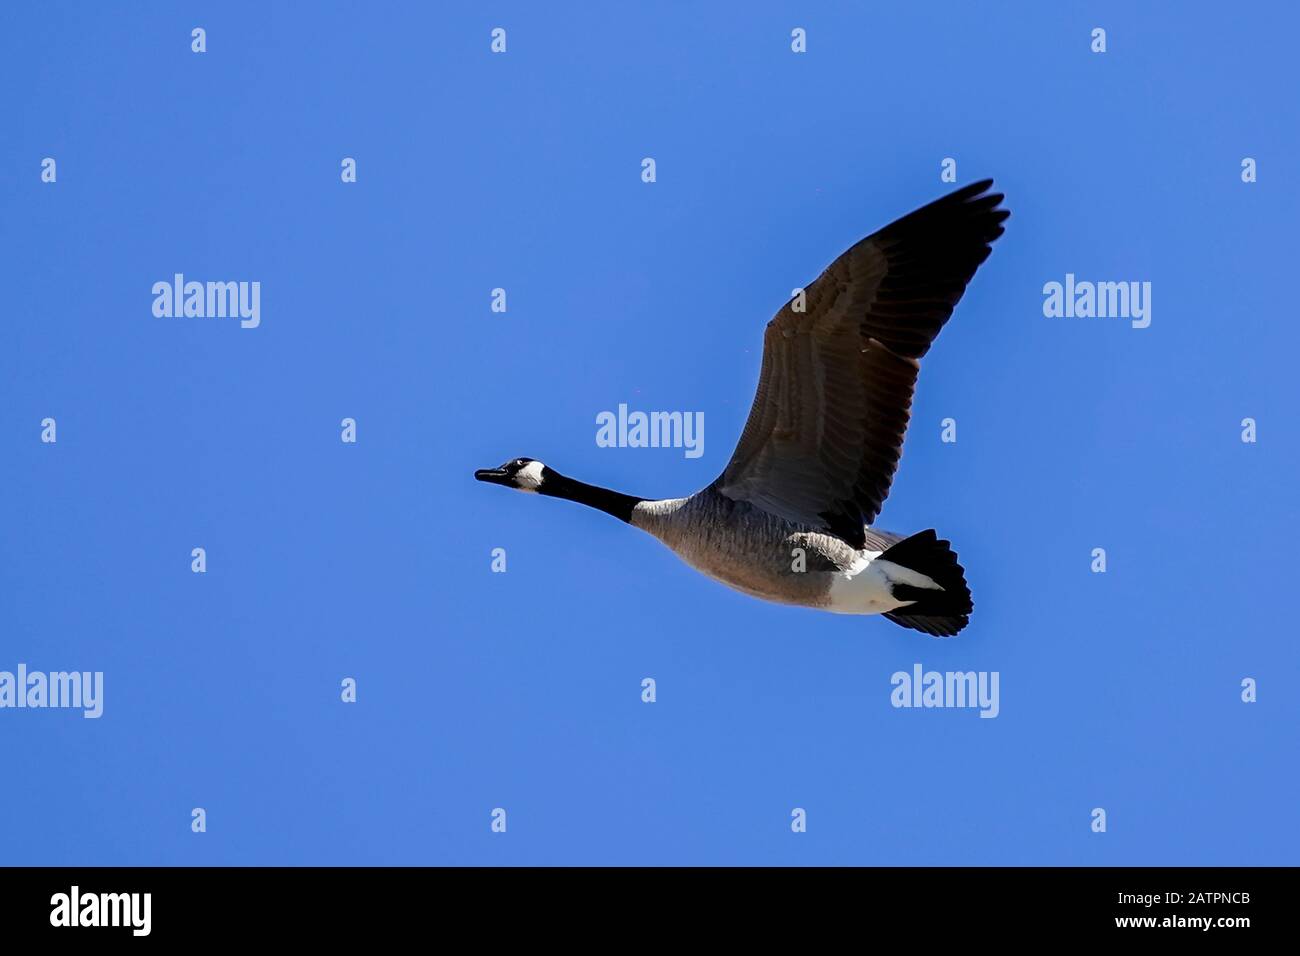 A Canadian goose in flight  with a blue sky. Scottsdale, Arizona. Stock Photo